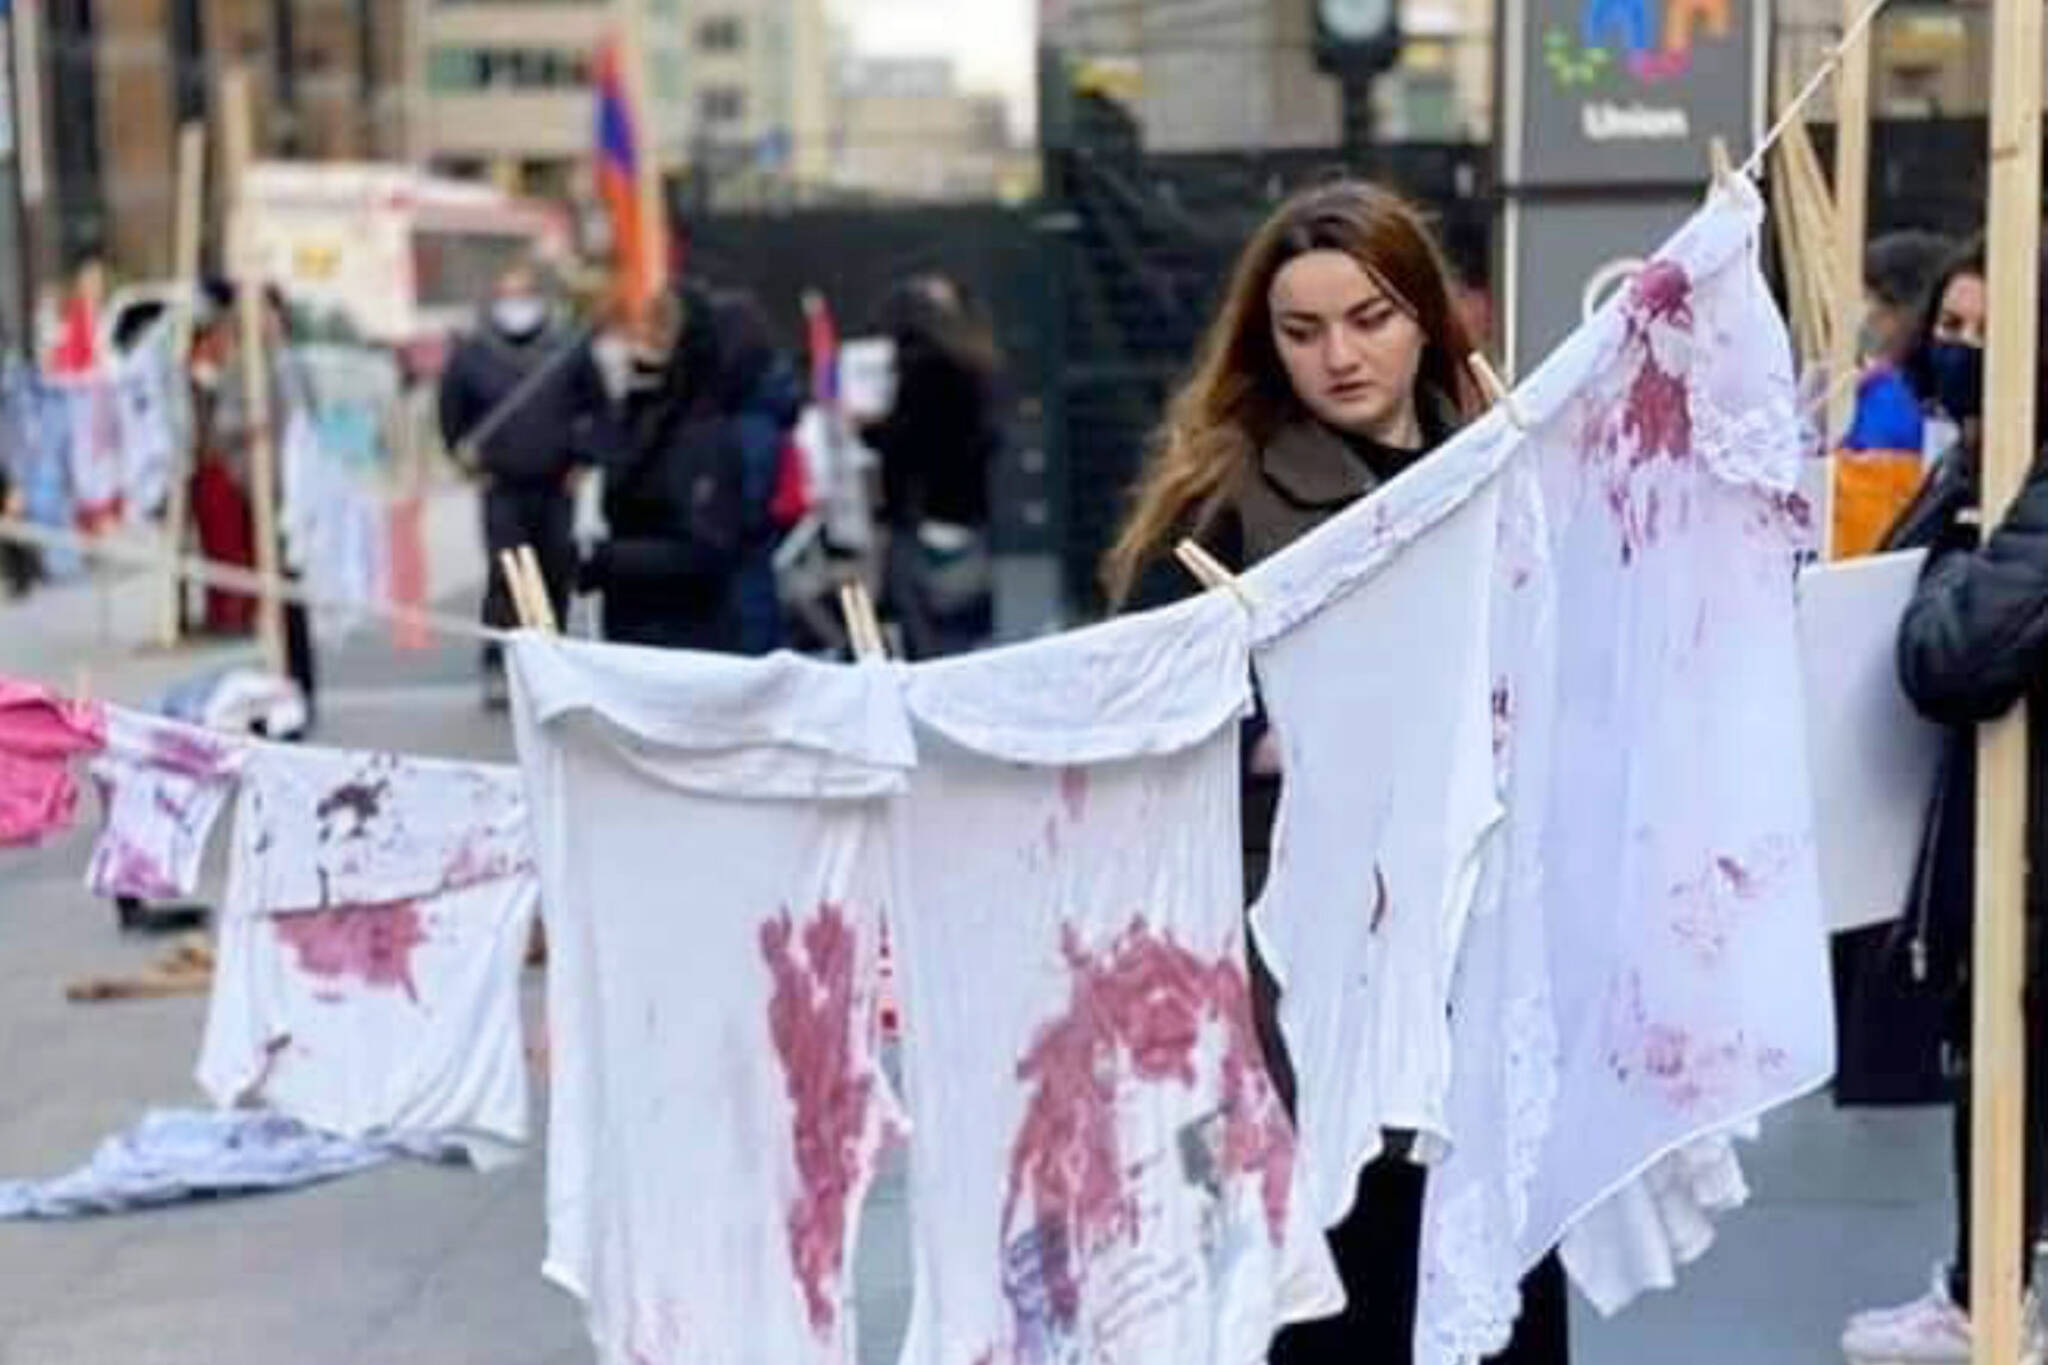 Blood soaked laundry scattered outside Union Station in Toronto